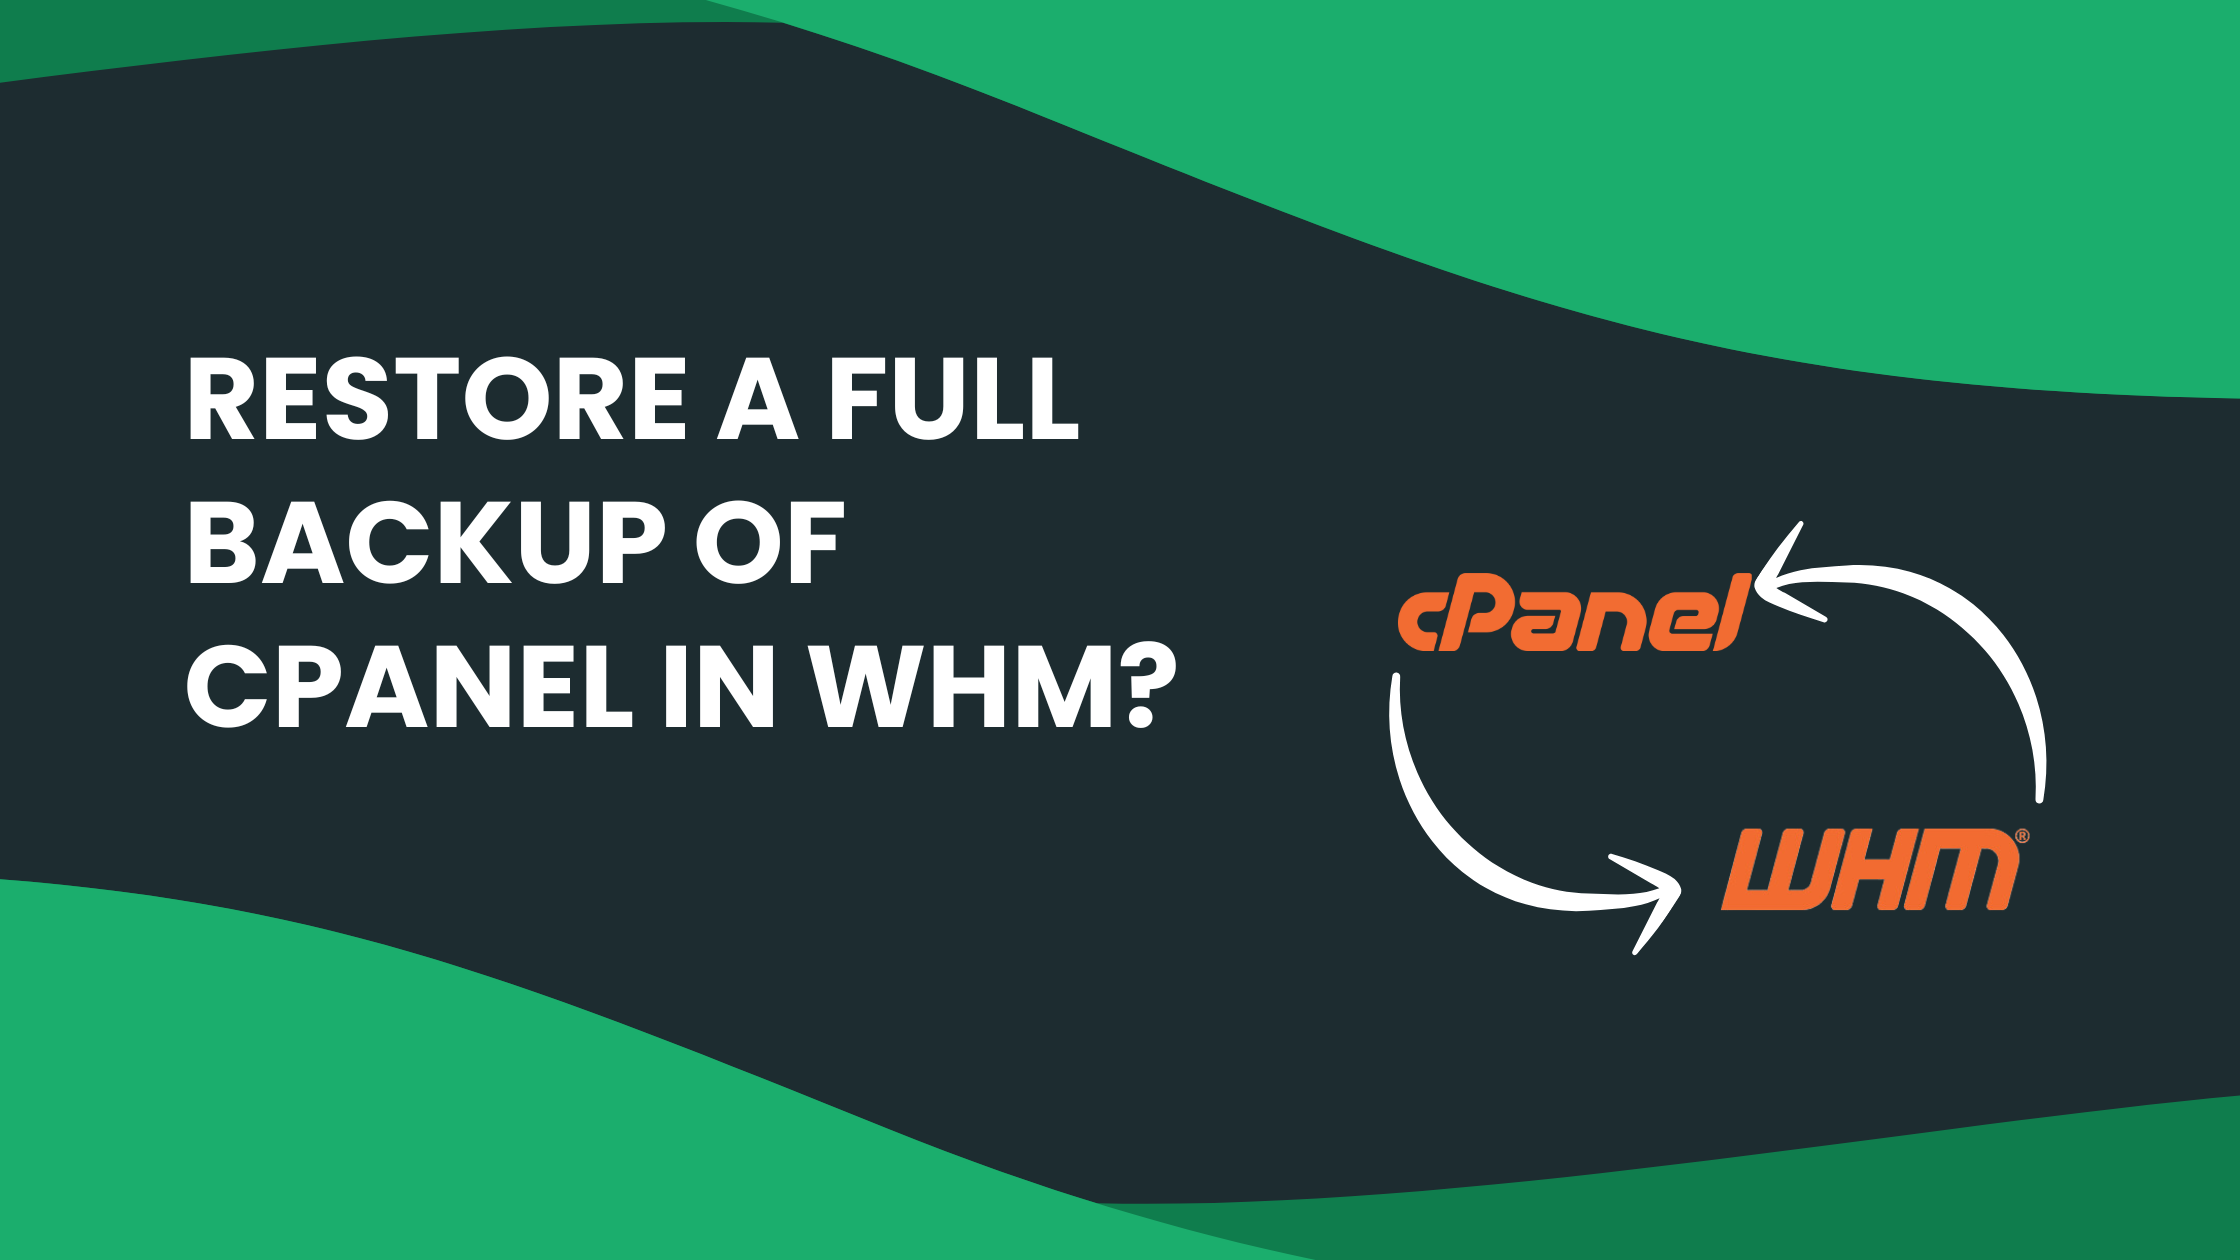 You are currently viewing How to Restore a Full Backup of cPanel in WHM?